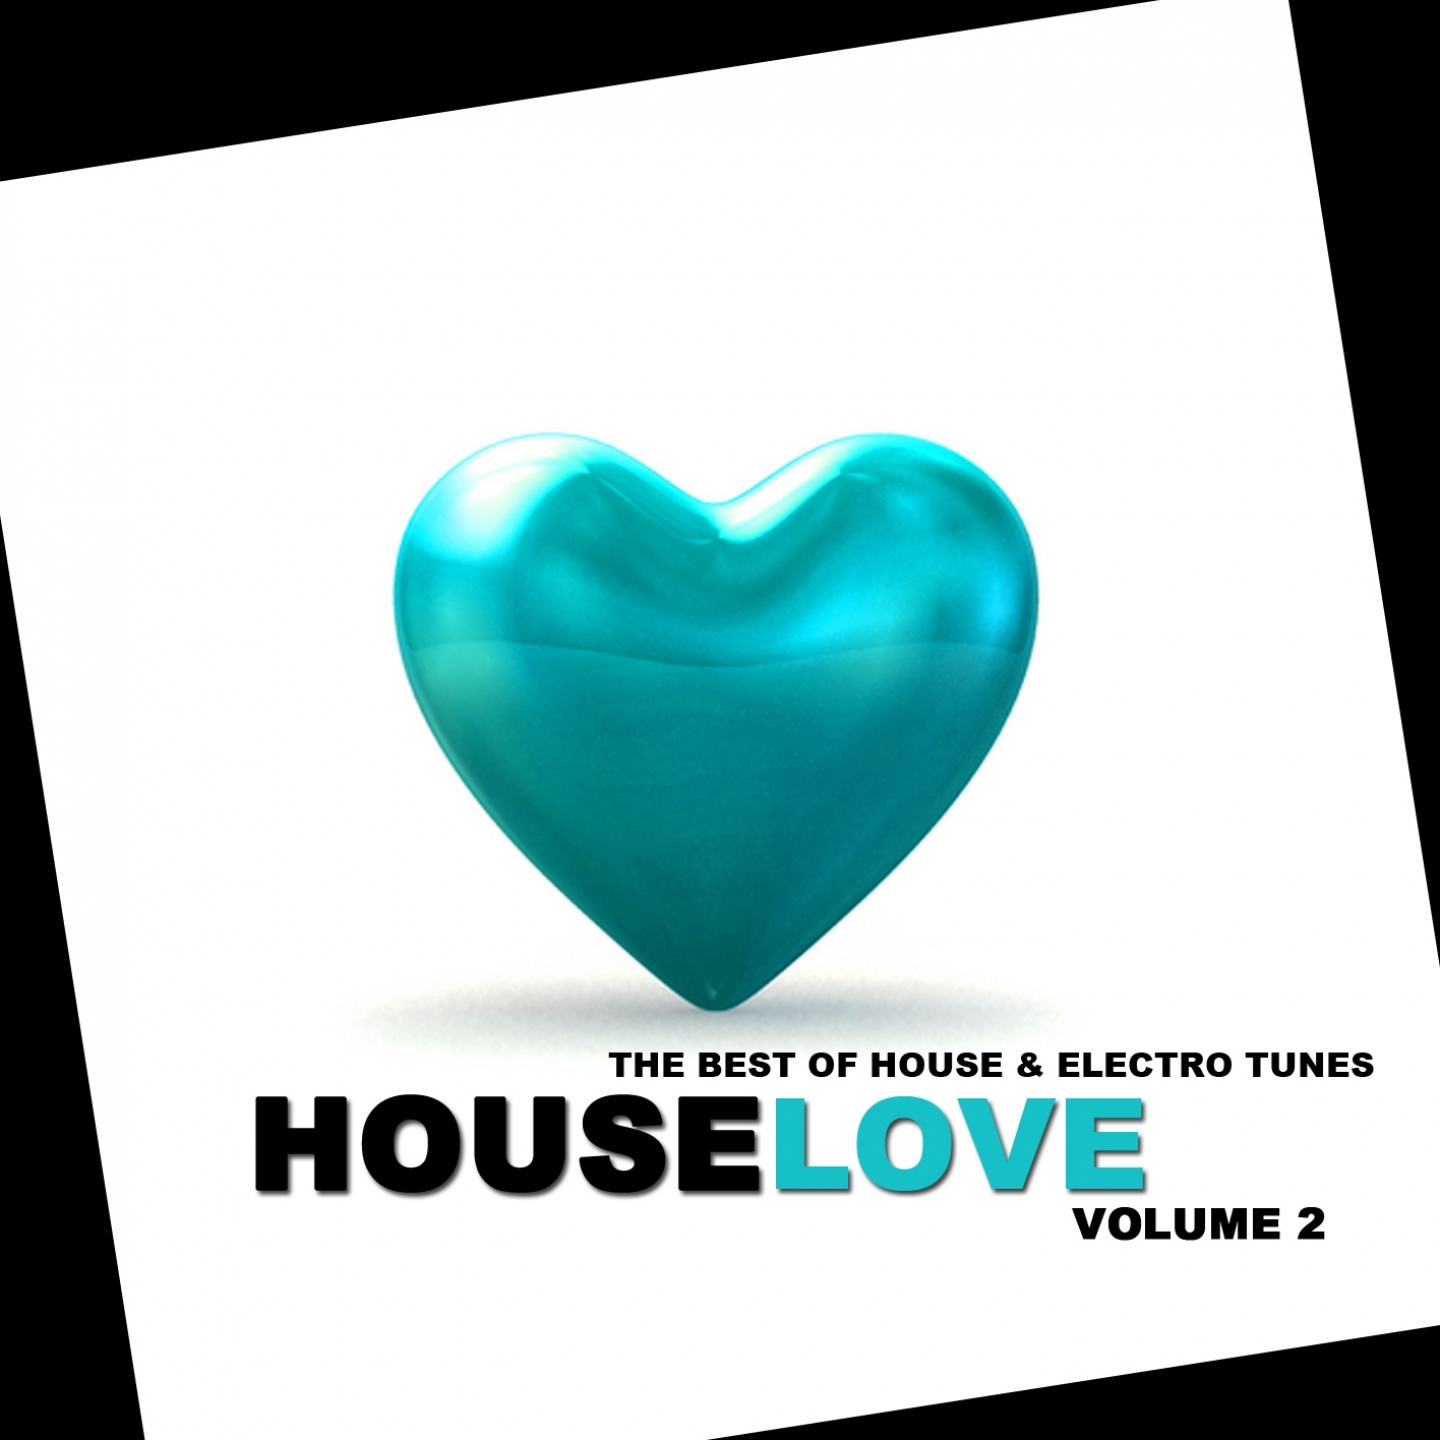 Houselove, Vol. 2 (The Best of House & Electro Tunes)